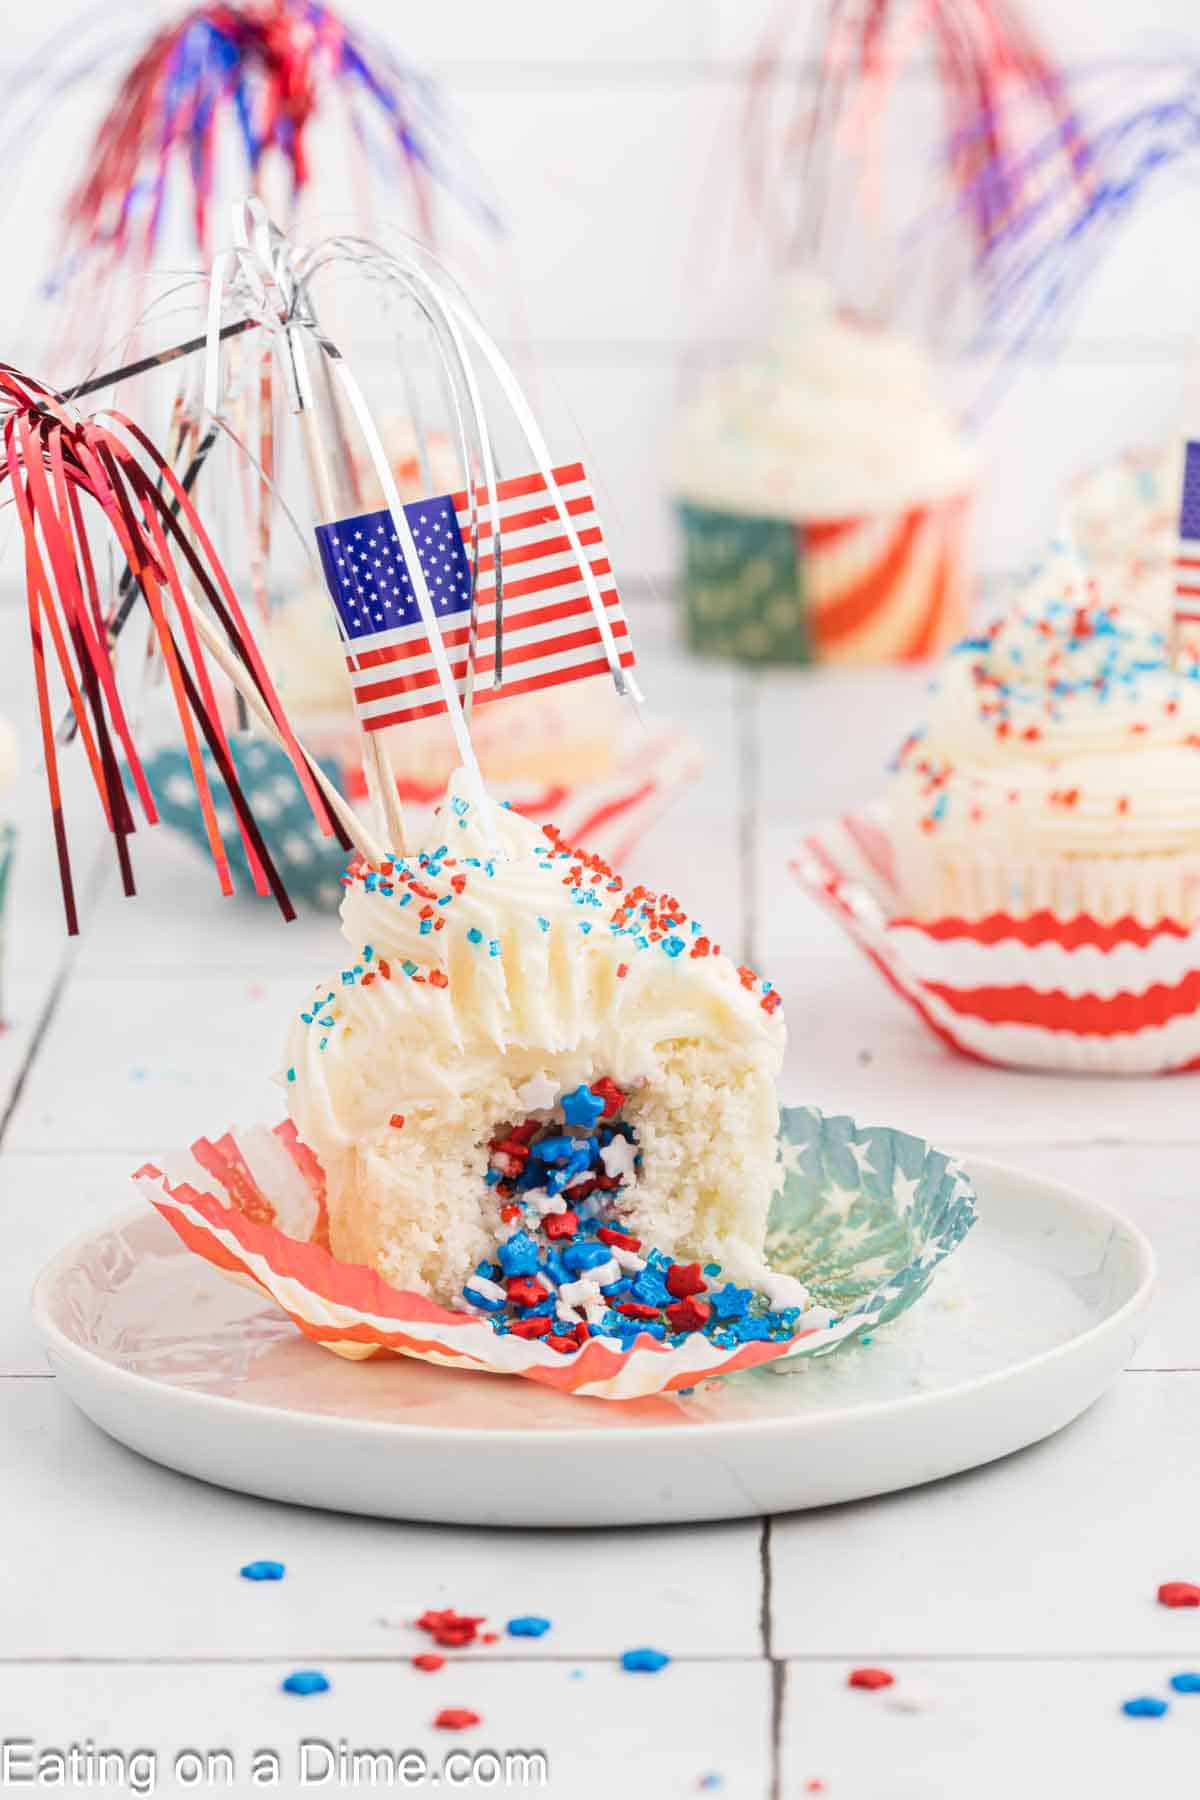 A festive Firecracker Cupcake with red, white, and blue sprinkles and an American flag pick sits on a plate. The cupcake wrapper is open, revealing a bite taken out of the cupcake, exposing more red, white, and blue sprinkles inside. Other decorated cupcakes are in the background.